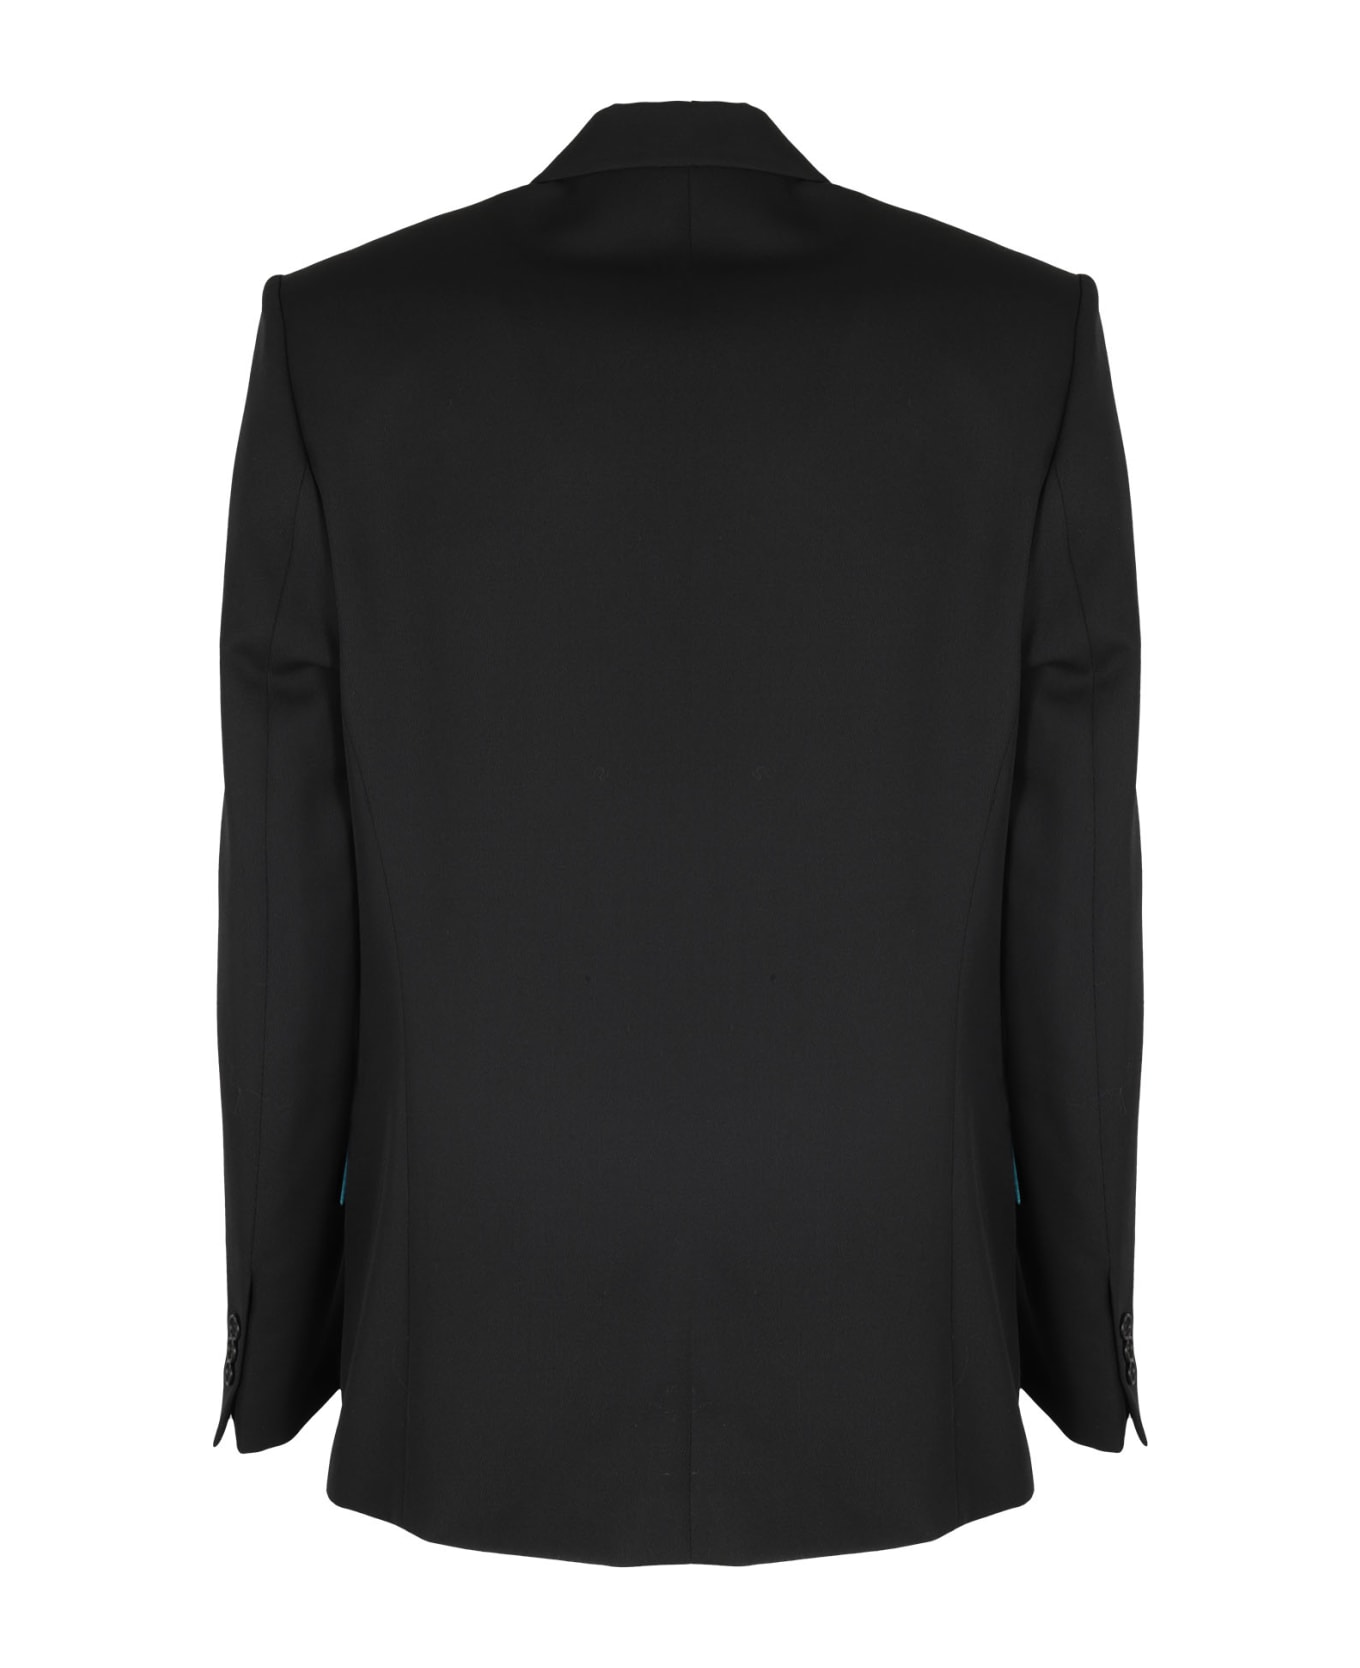 Botter Double Breasted Classic Blazer - Wool Suit Black